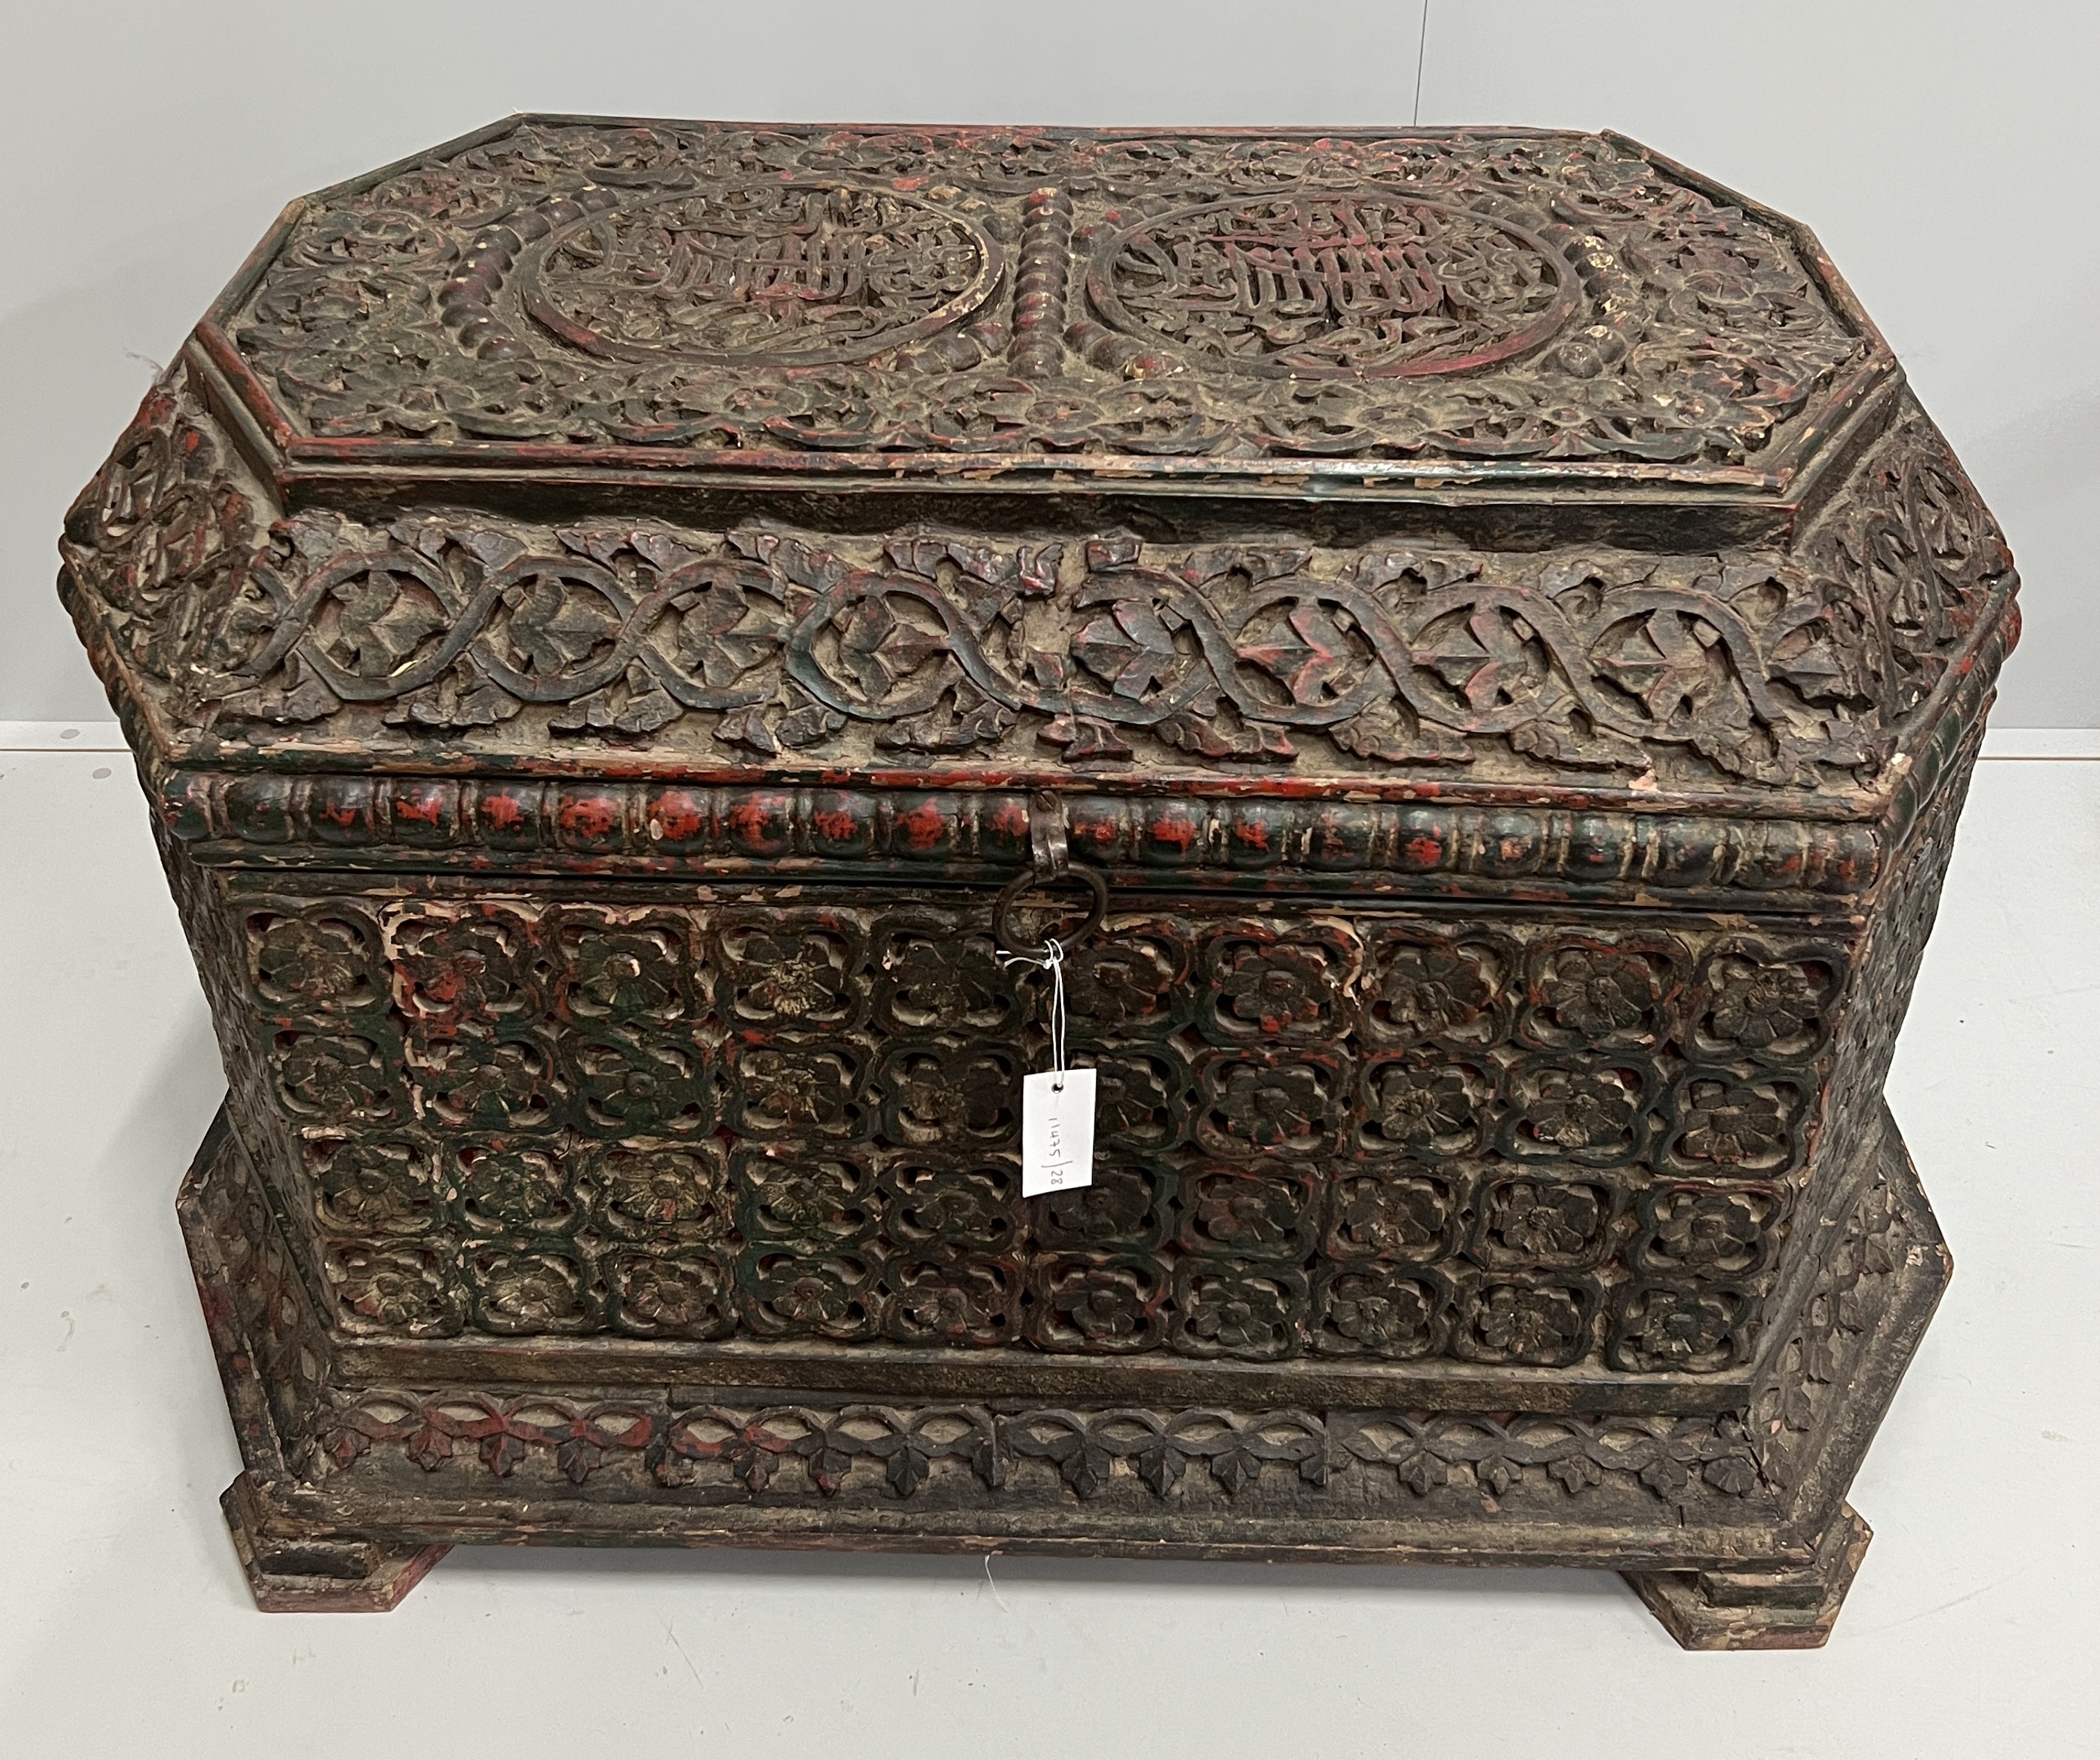 An Islamic octagonal carved wood trunk, width 116cm, depth 64cm, height 64cm, the cover carved “Abu Al-Nasr Qaitbay” (Glory Be to Our Master the Sultan)